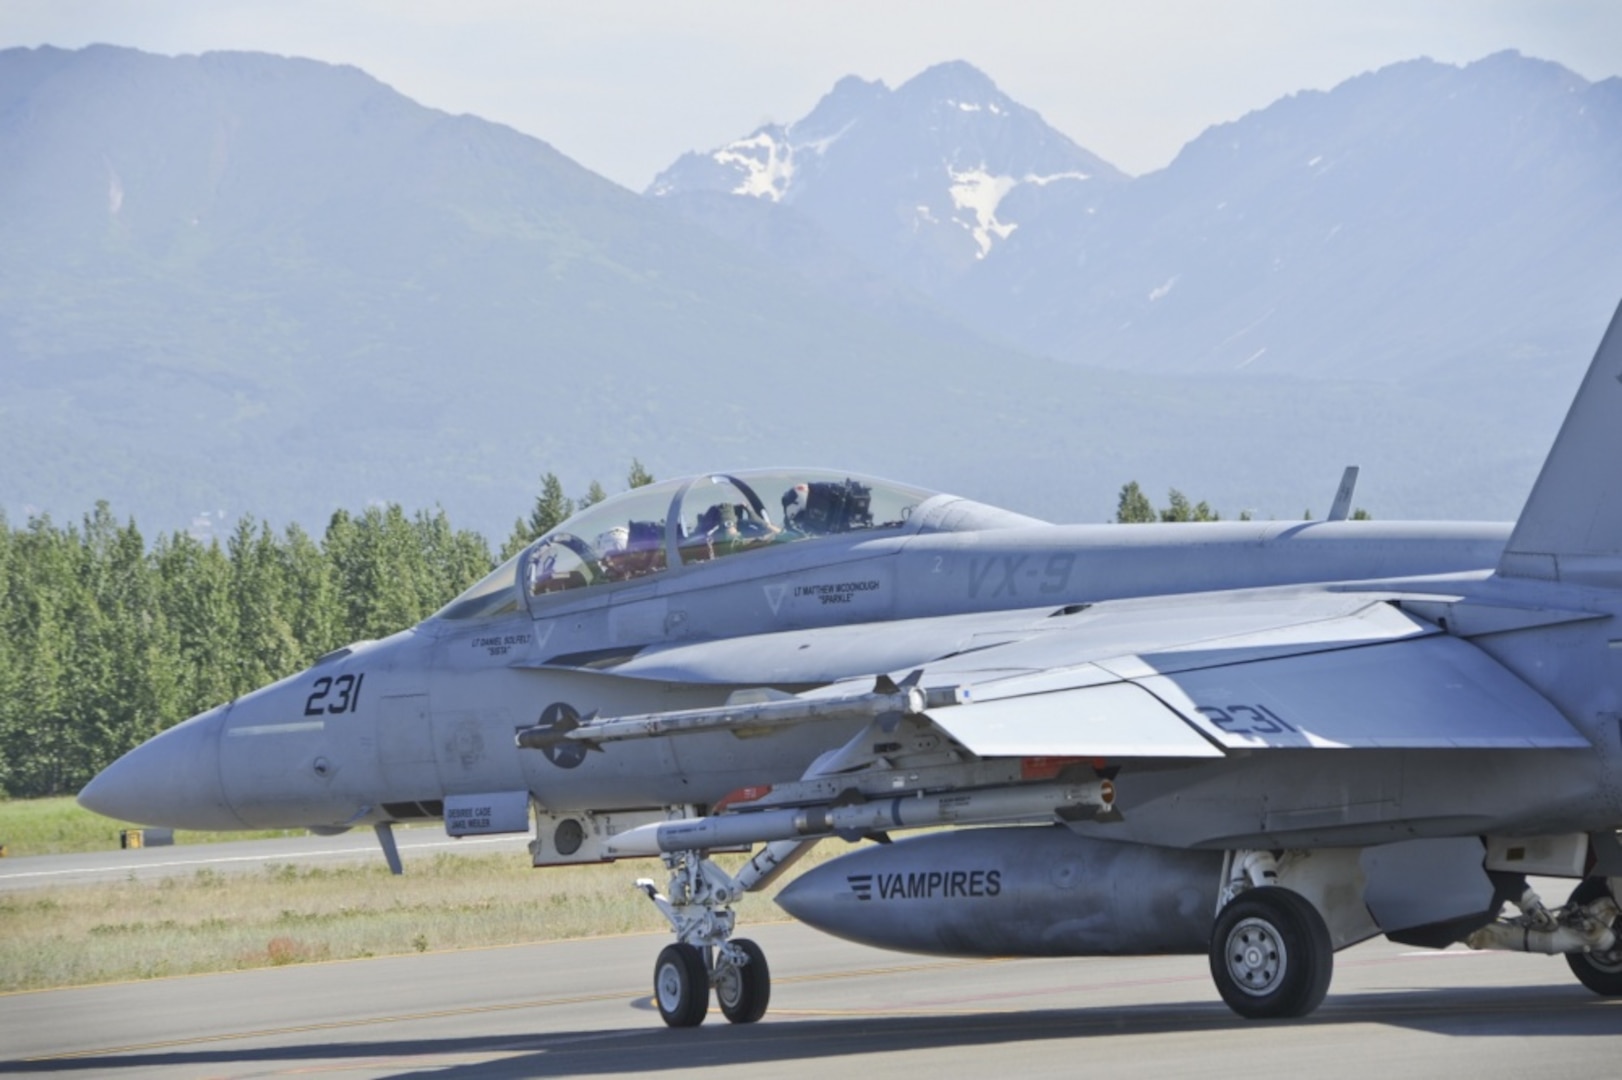 In this official file photo of Northern Edge 2015, a U.S. Navy F/A-18F Super Hornet from the Air Test Squadron, China Lake, Calif., taxis to take off during Exercise Northern Edge at Joint Base Elmendorf-Richardson, June 18, 2015. Northern Edge 15 is Alaska’s premier joint training exercise designed to practice operations, techniques and procedures as well as enhance interoperability among the services. Thousands of participants from all services, from active duty, Reserve and National Guard units, are involved.